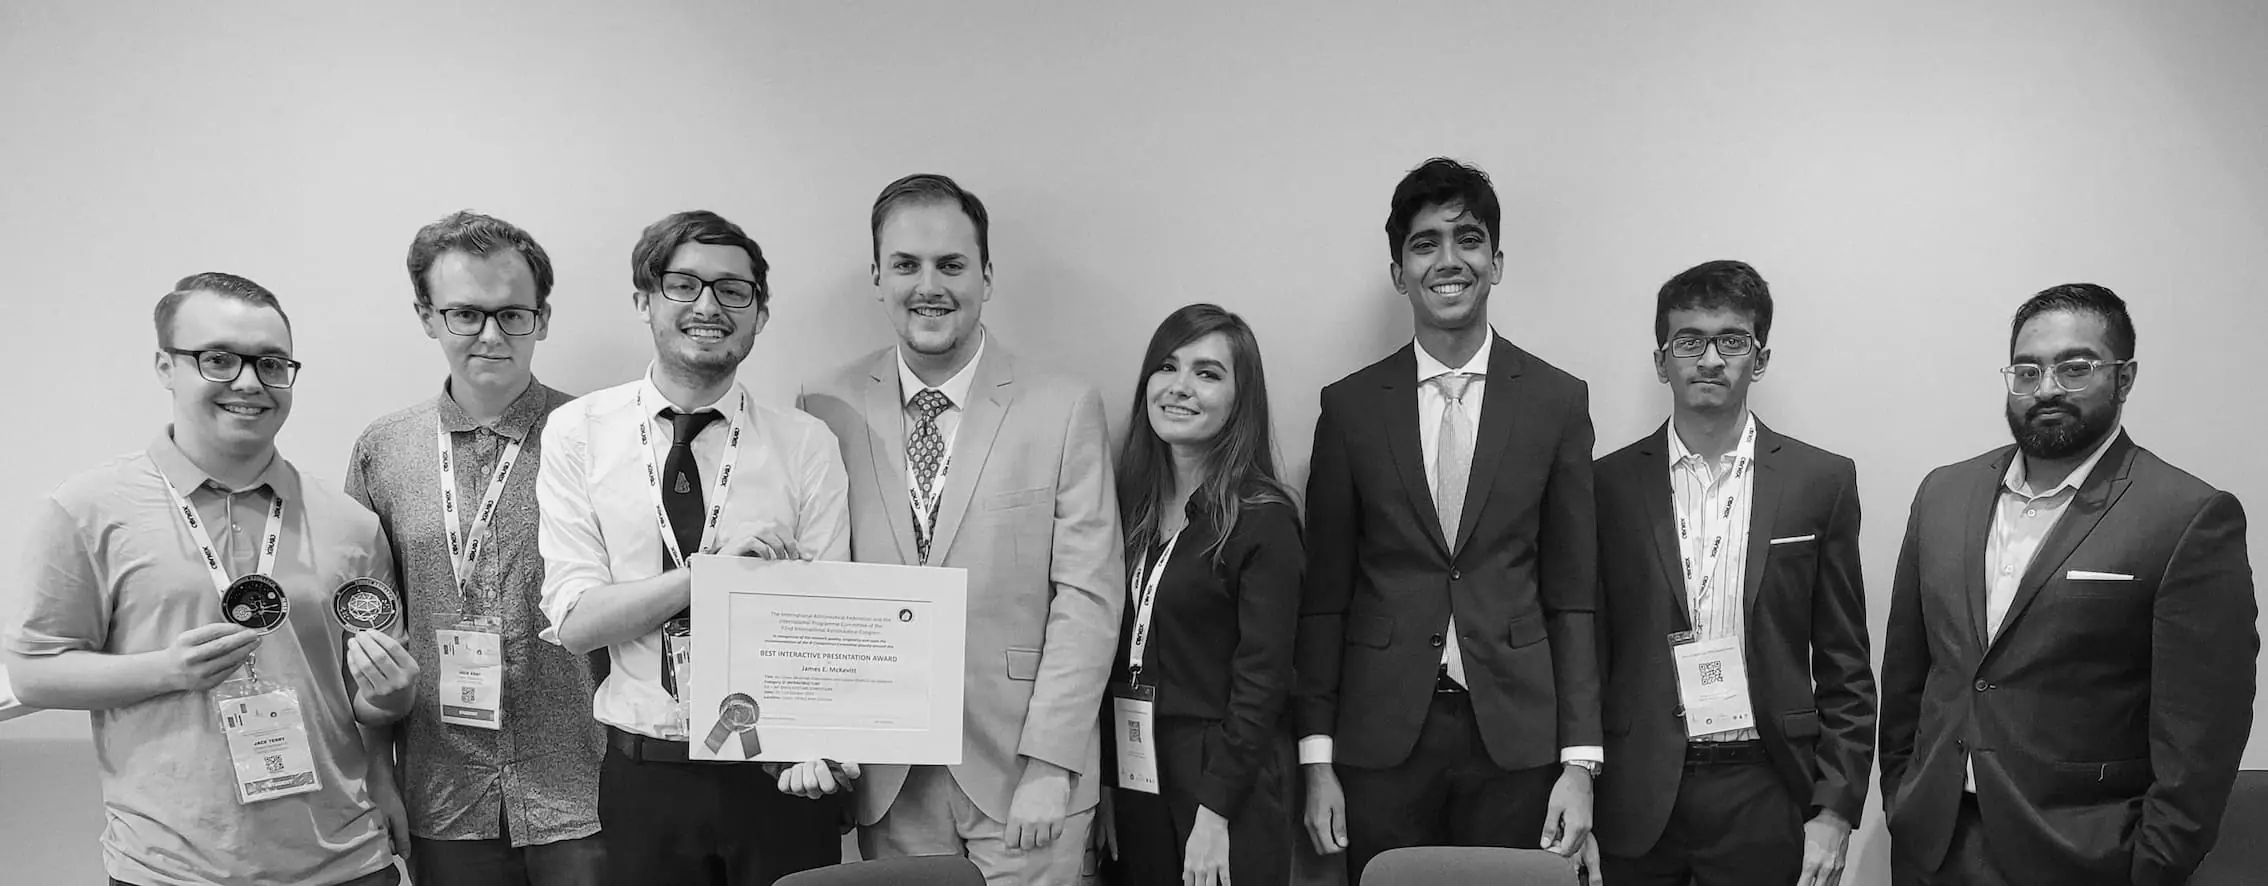 Greyscale photo of the Conex team with an award certificate